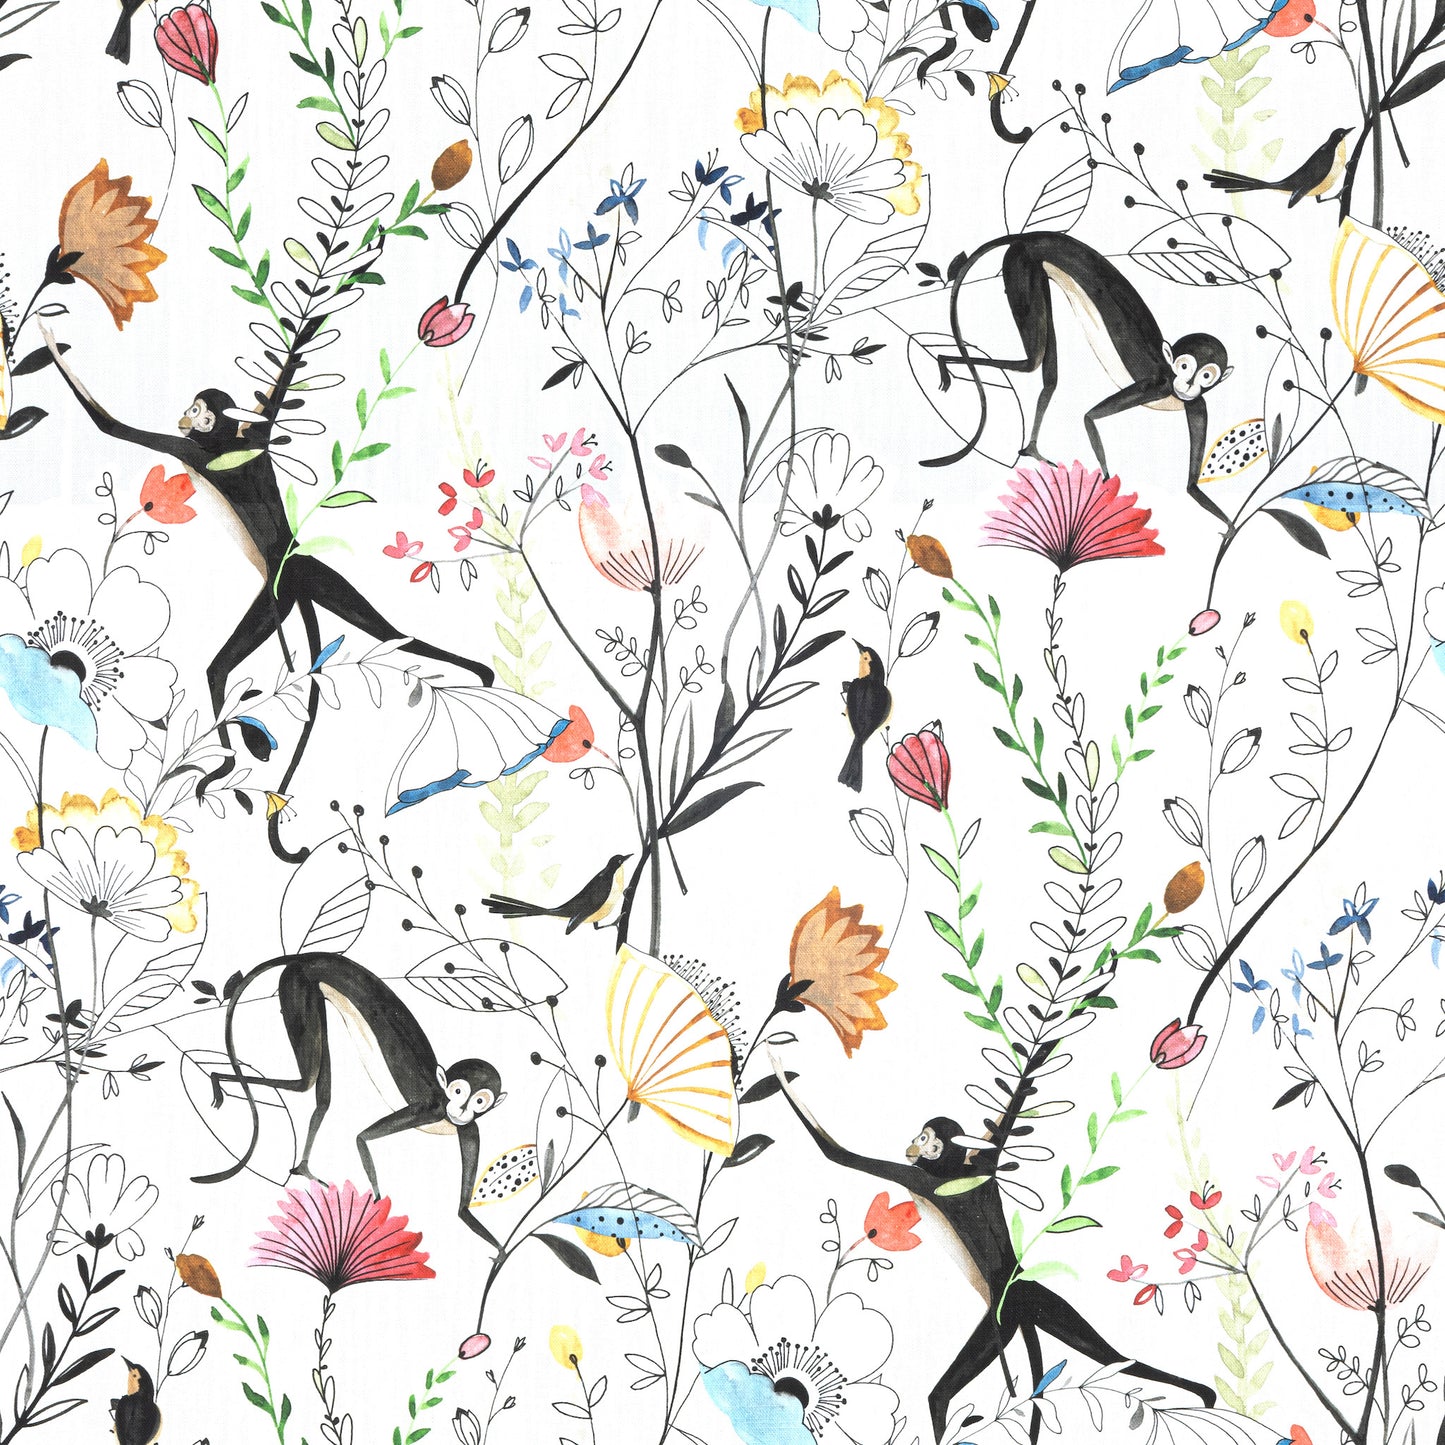 Tie-up Valance in Entangled, a Monkey & Bird Watercolor Floral Jungle